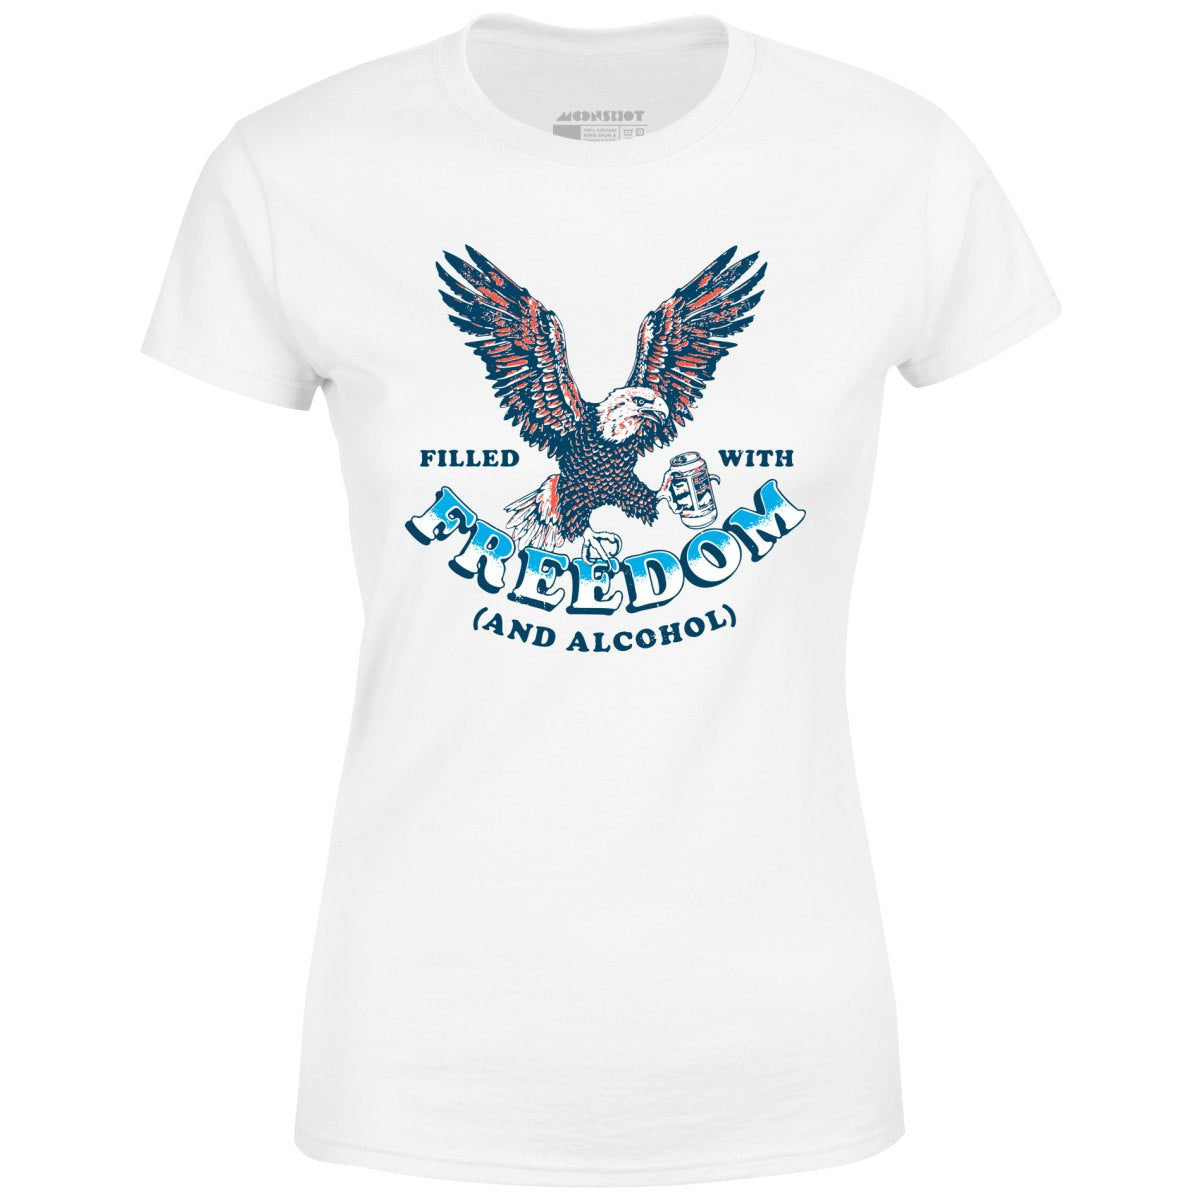 Filled With Freedom - Women's T-Shirt